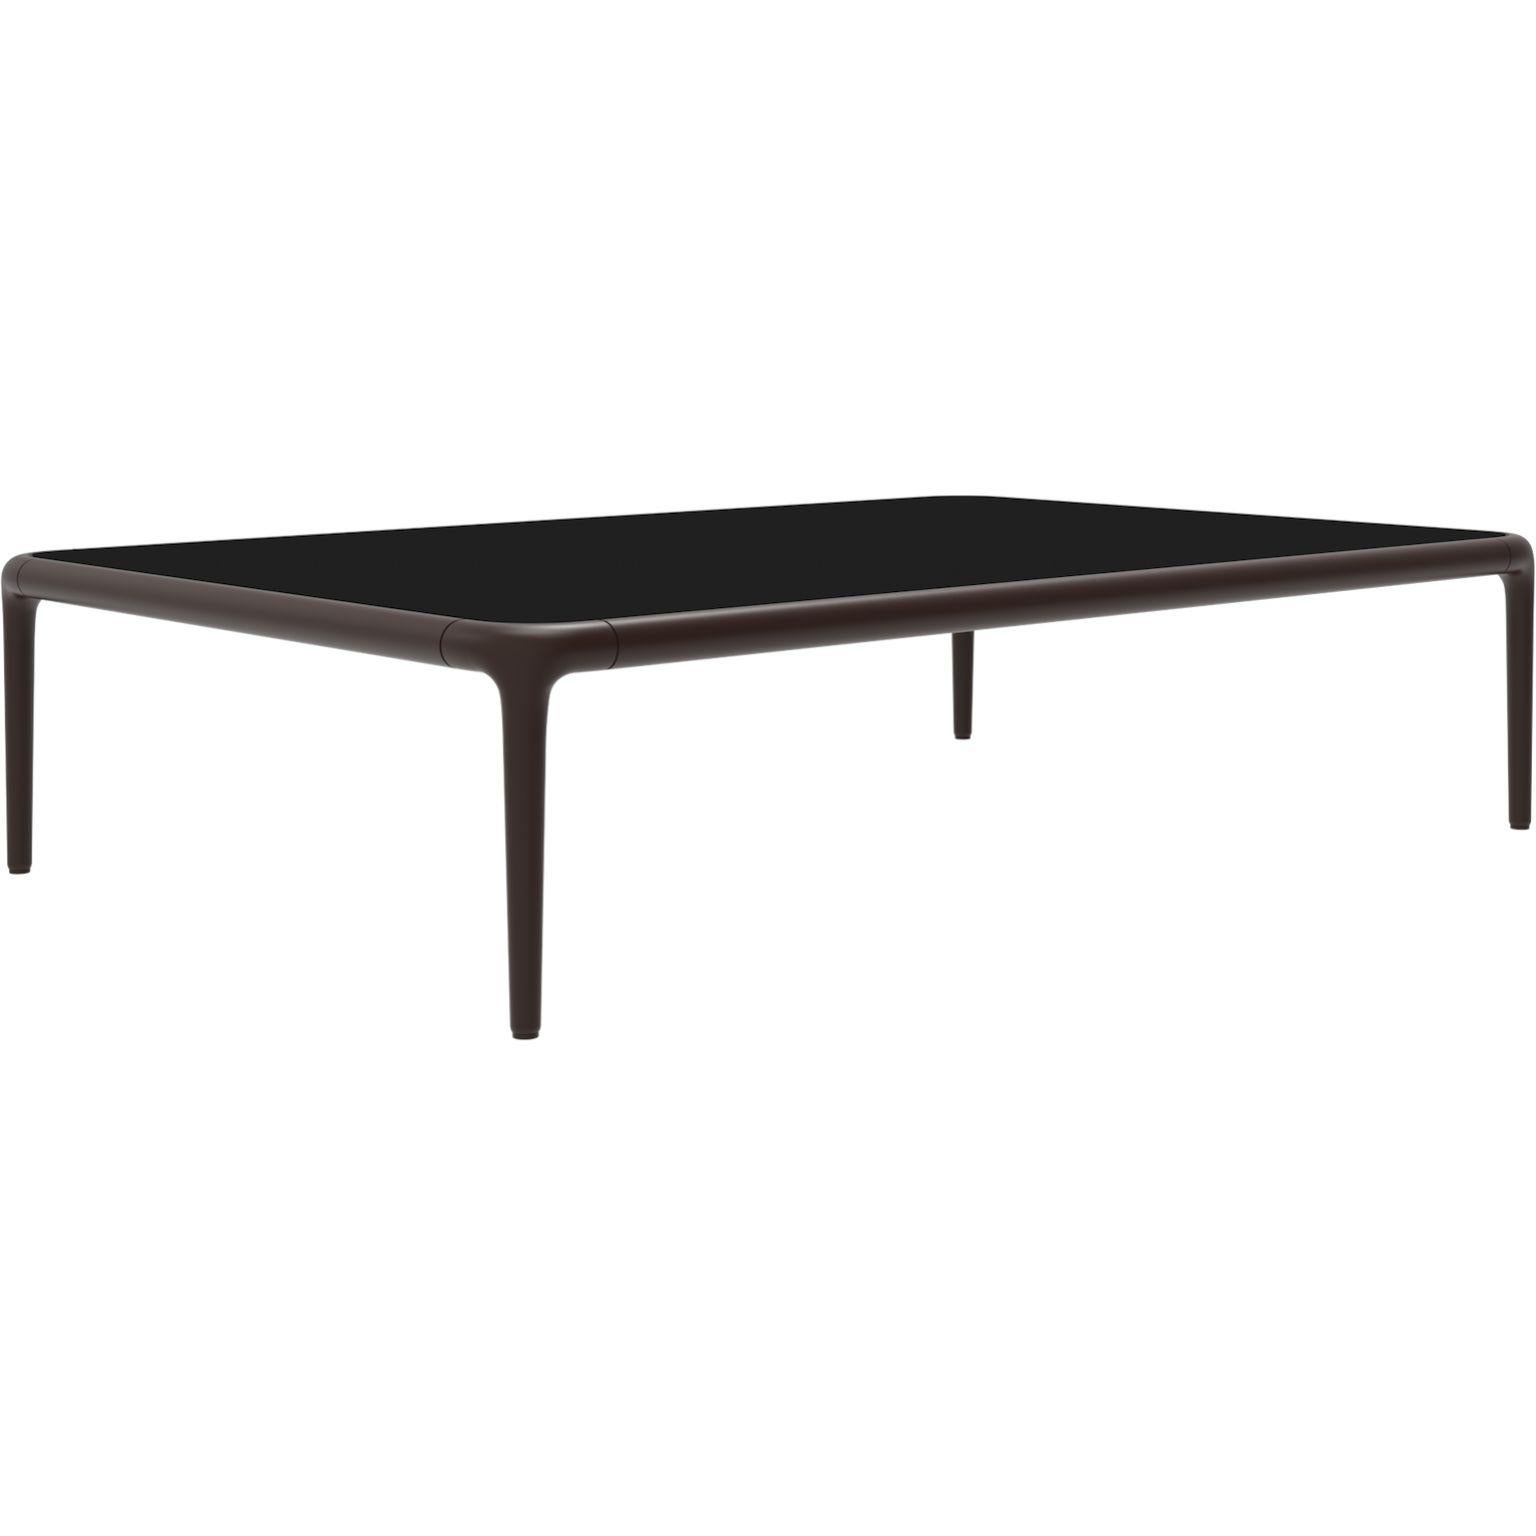 Xaloc chocolate coffee table 120 with glass top by MOWEE
Dimensions: D120 x W80 x H28 cm
Materials: Aluminum, tinted tempered glass top.
Also available in different aluminum colors and finishes (HPL Black Edge or Neolith). 

Xaloc synthesizes